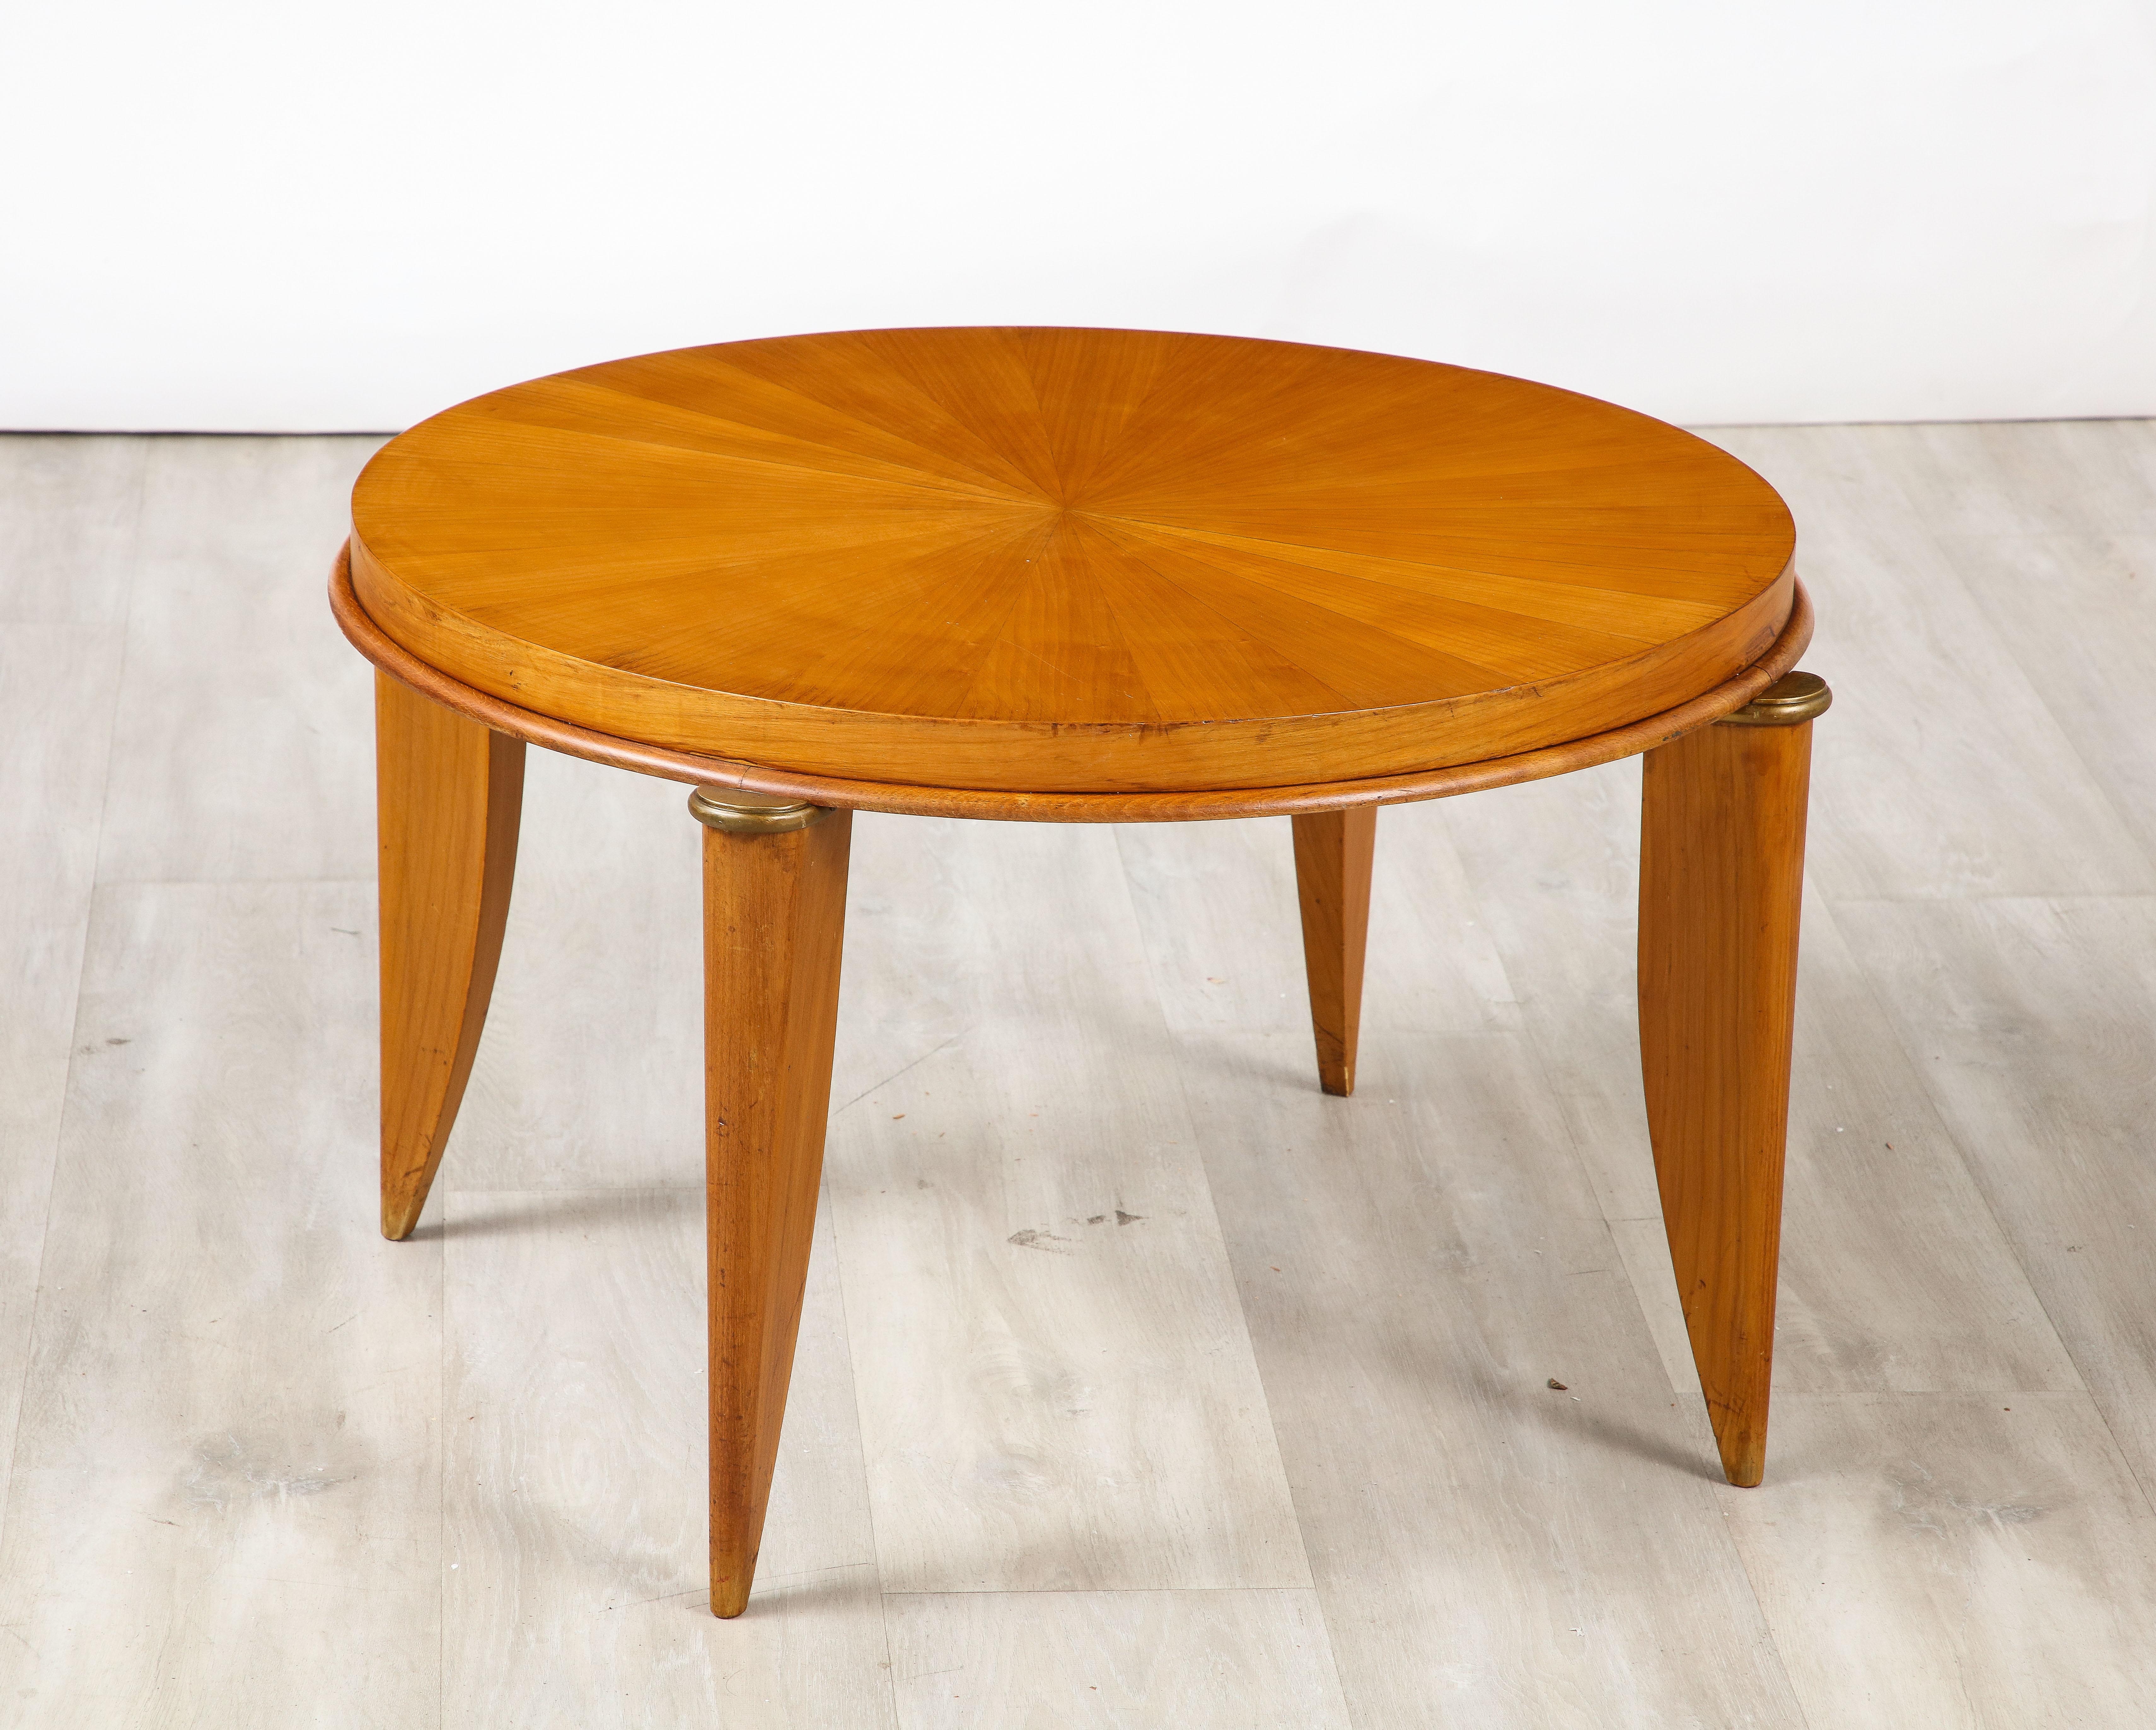 Laiton Maurice Jallot French Art Deco Cocktail or Side Table, France, circa 1940  en vente